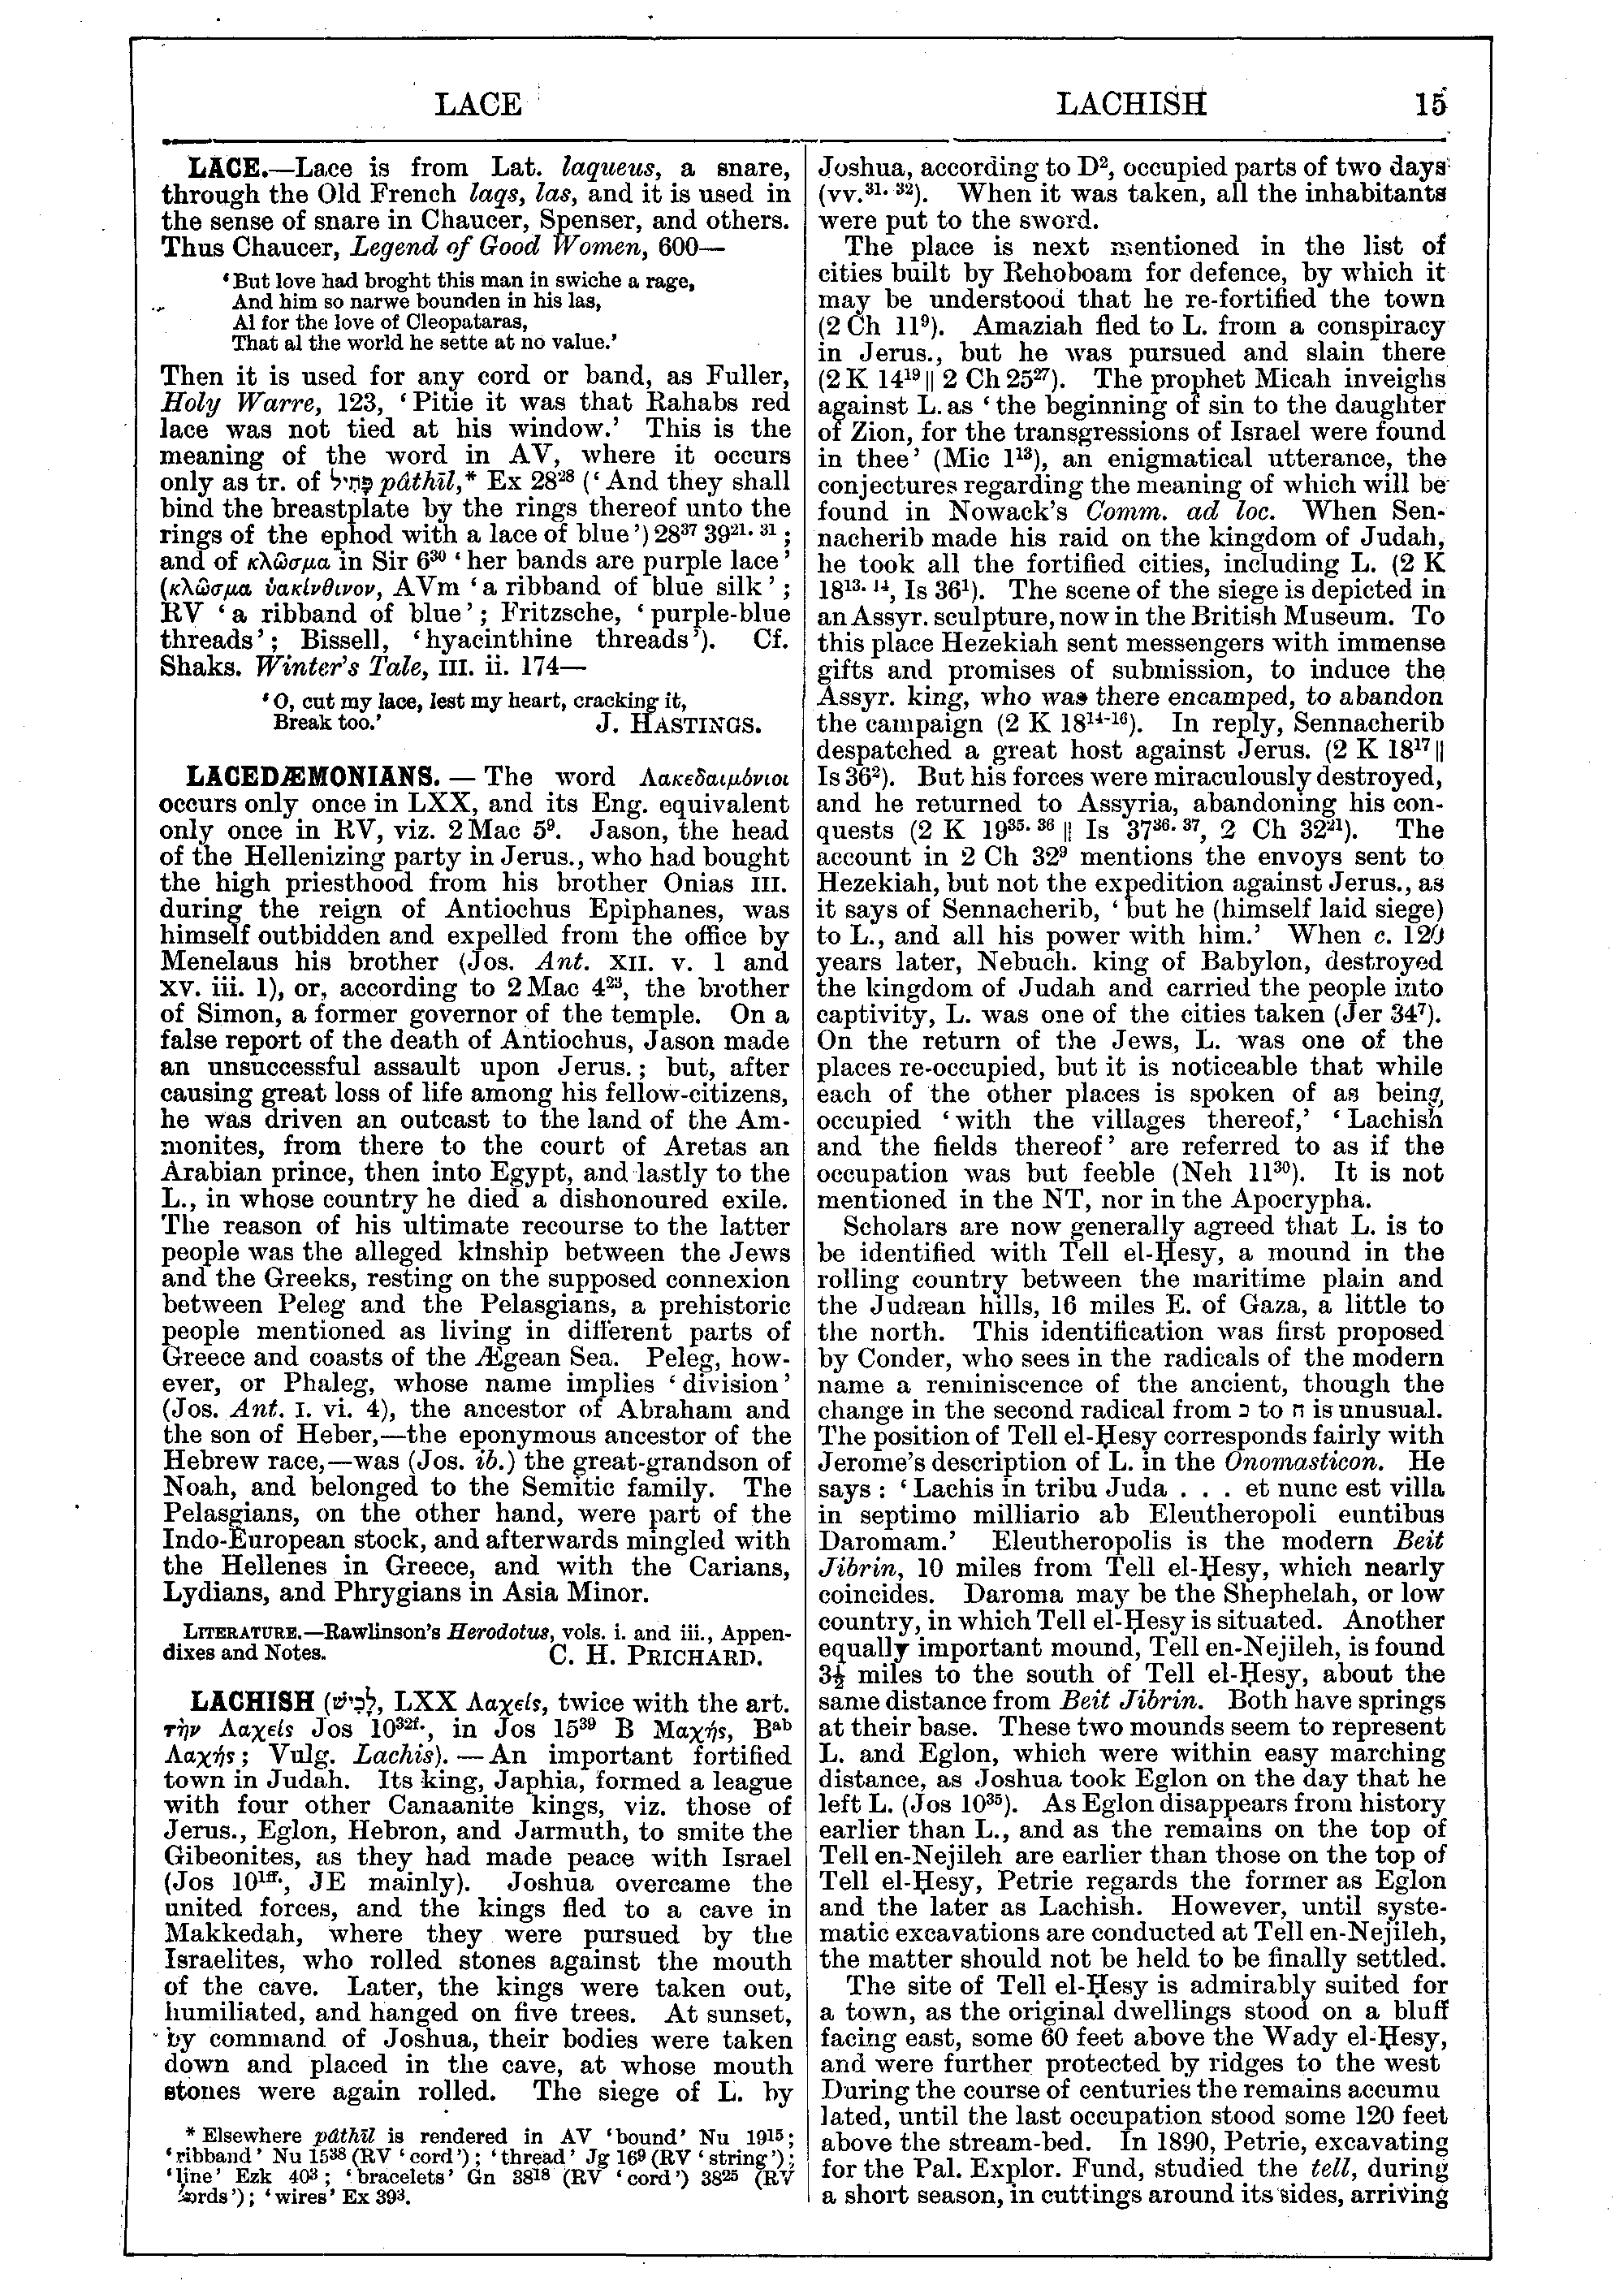 Image of page 15